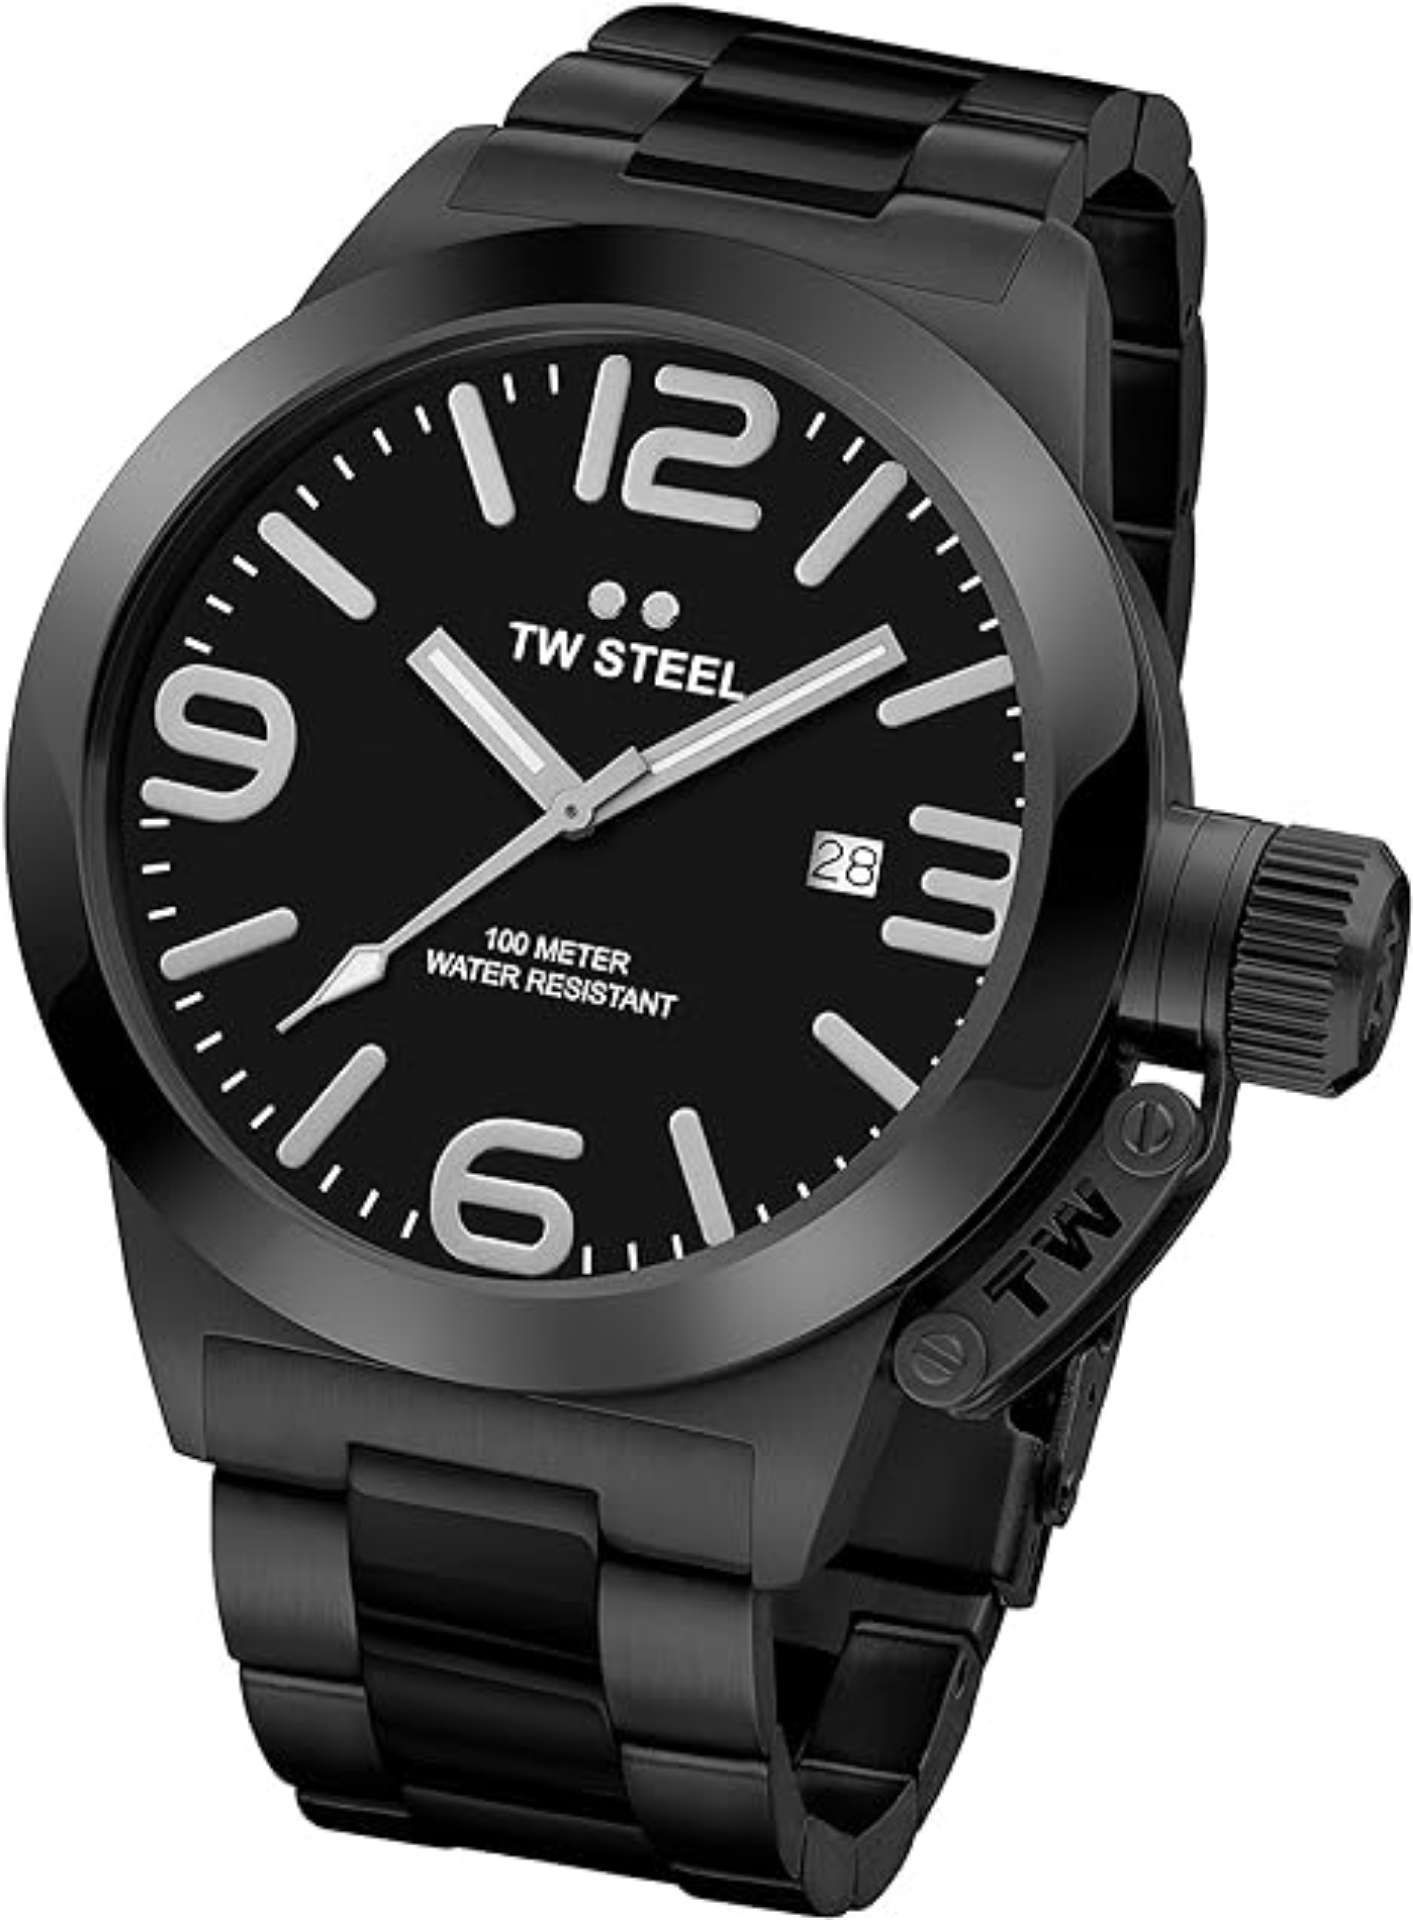 Brand NewTW Steel Men's Quartz Watch with Black Dial Analogue Display and Black Stainless Steel